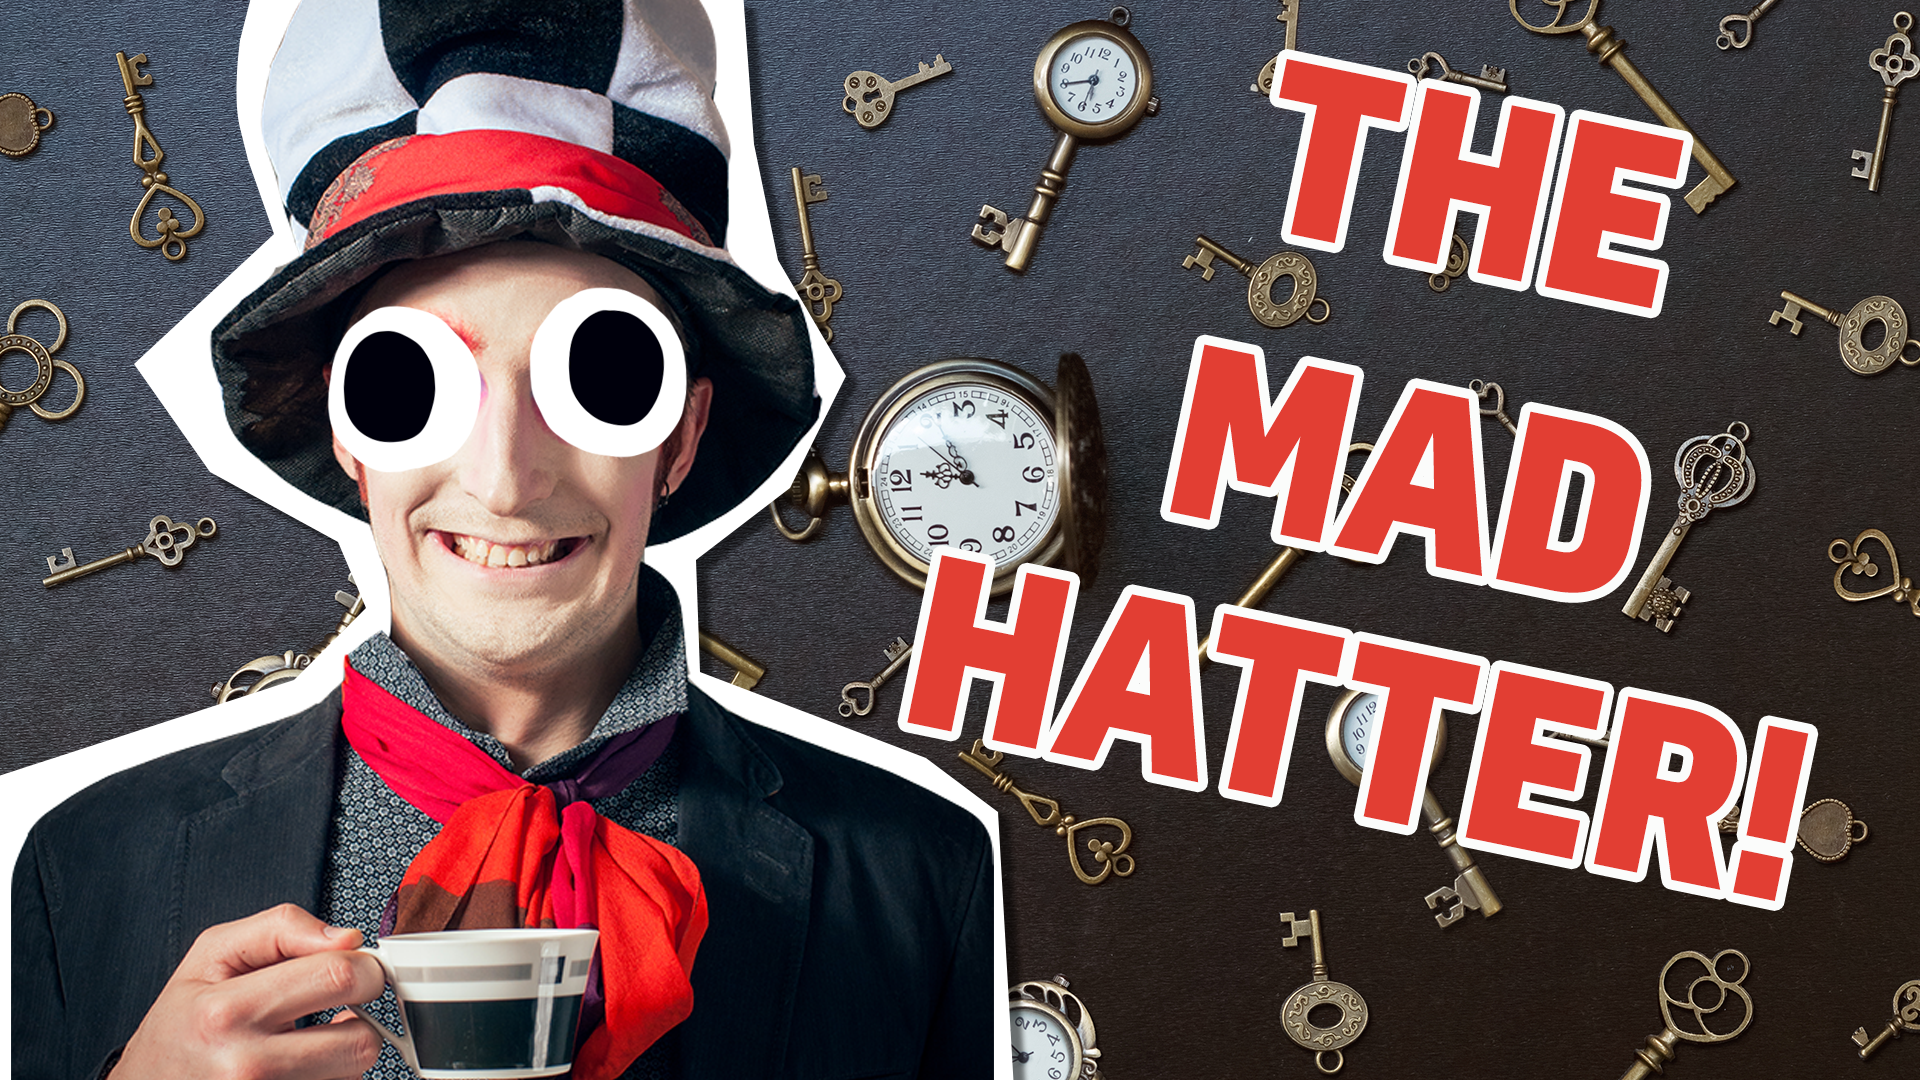 You're the Mad Hatter! You play by your own rules, and you don't care what anyone thinks about you! You love hanging out and chilling with your friends - you don't know the meaning of hard work!